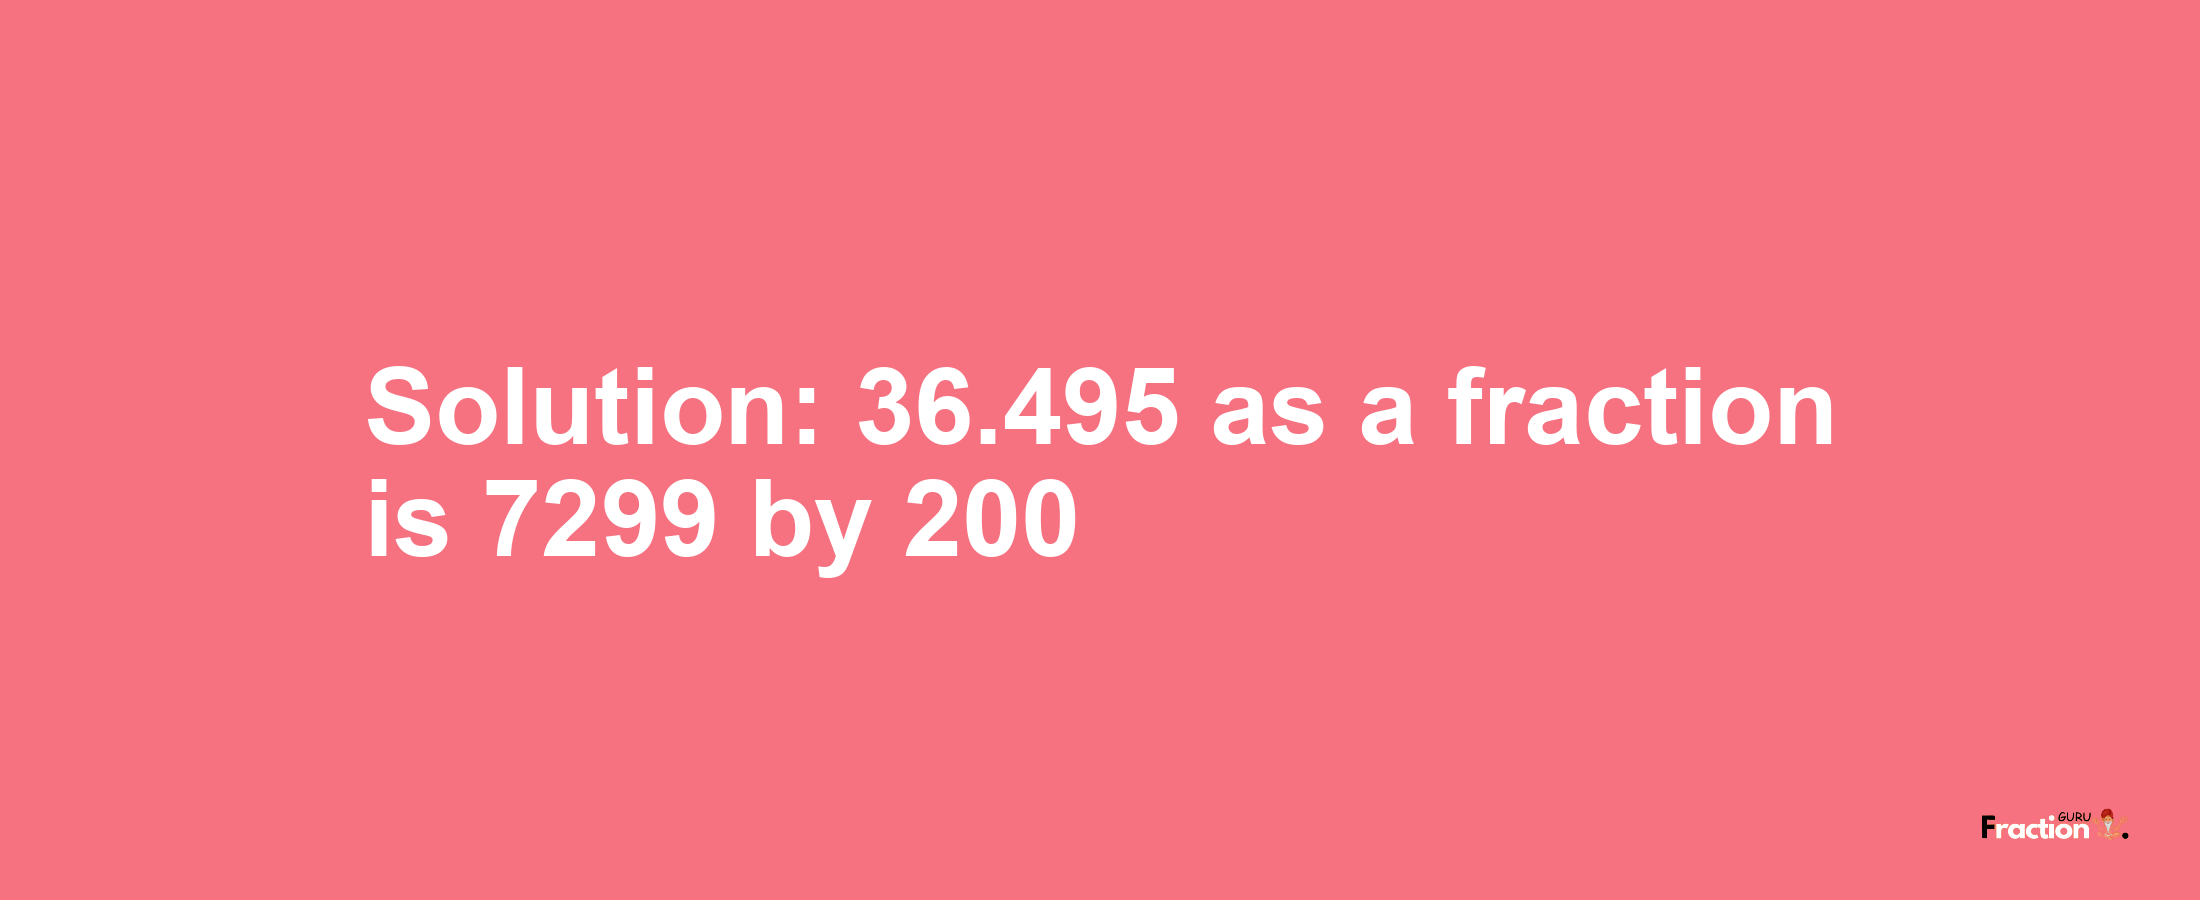 Solution:36.495 as a fraction is 7299/200